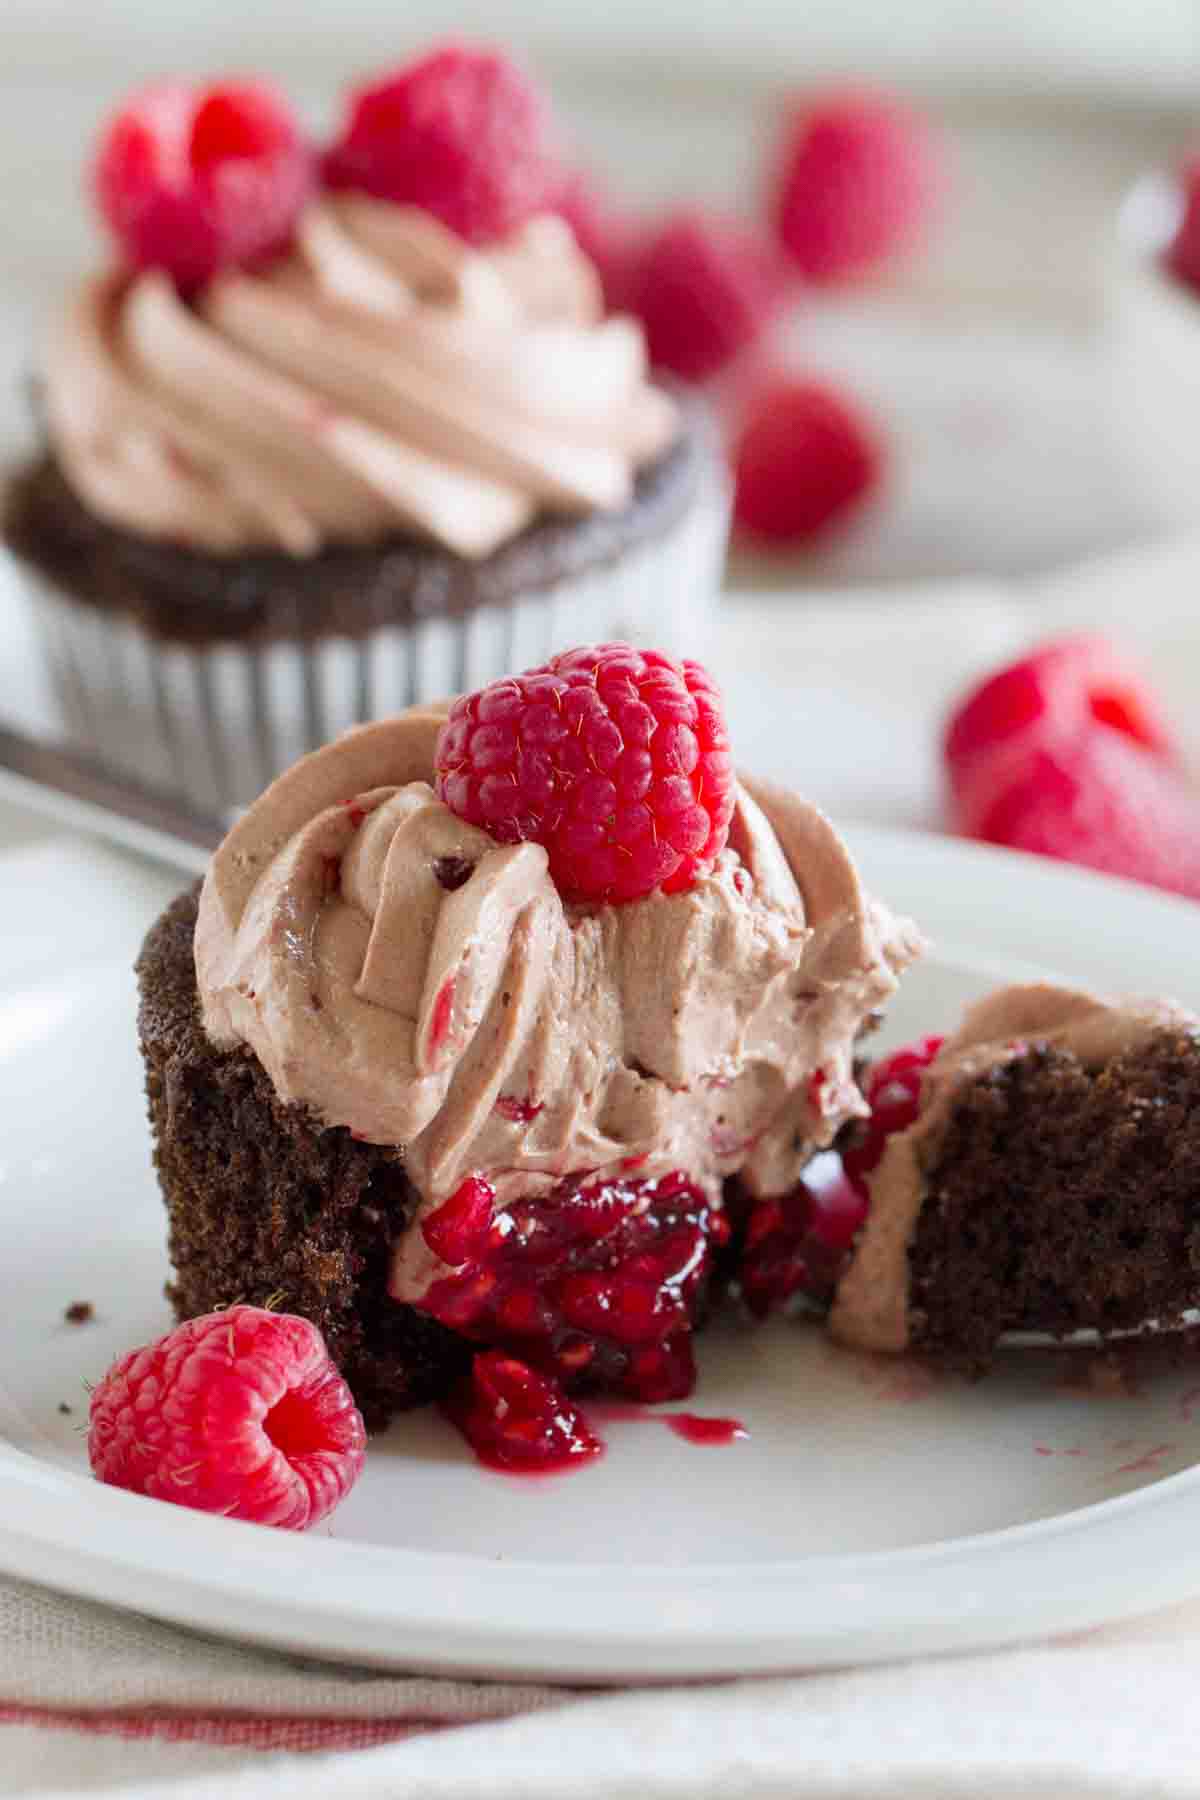 Chocolate cupcake topped with chocolate butterream broken in half to show raspberry filling.